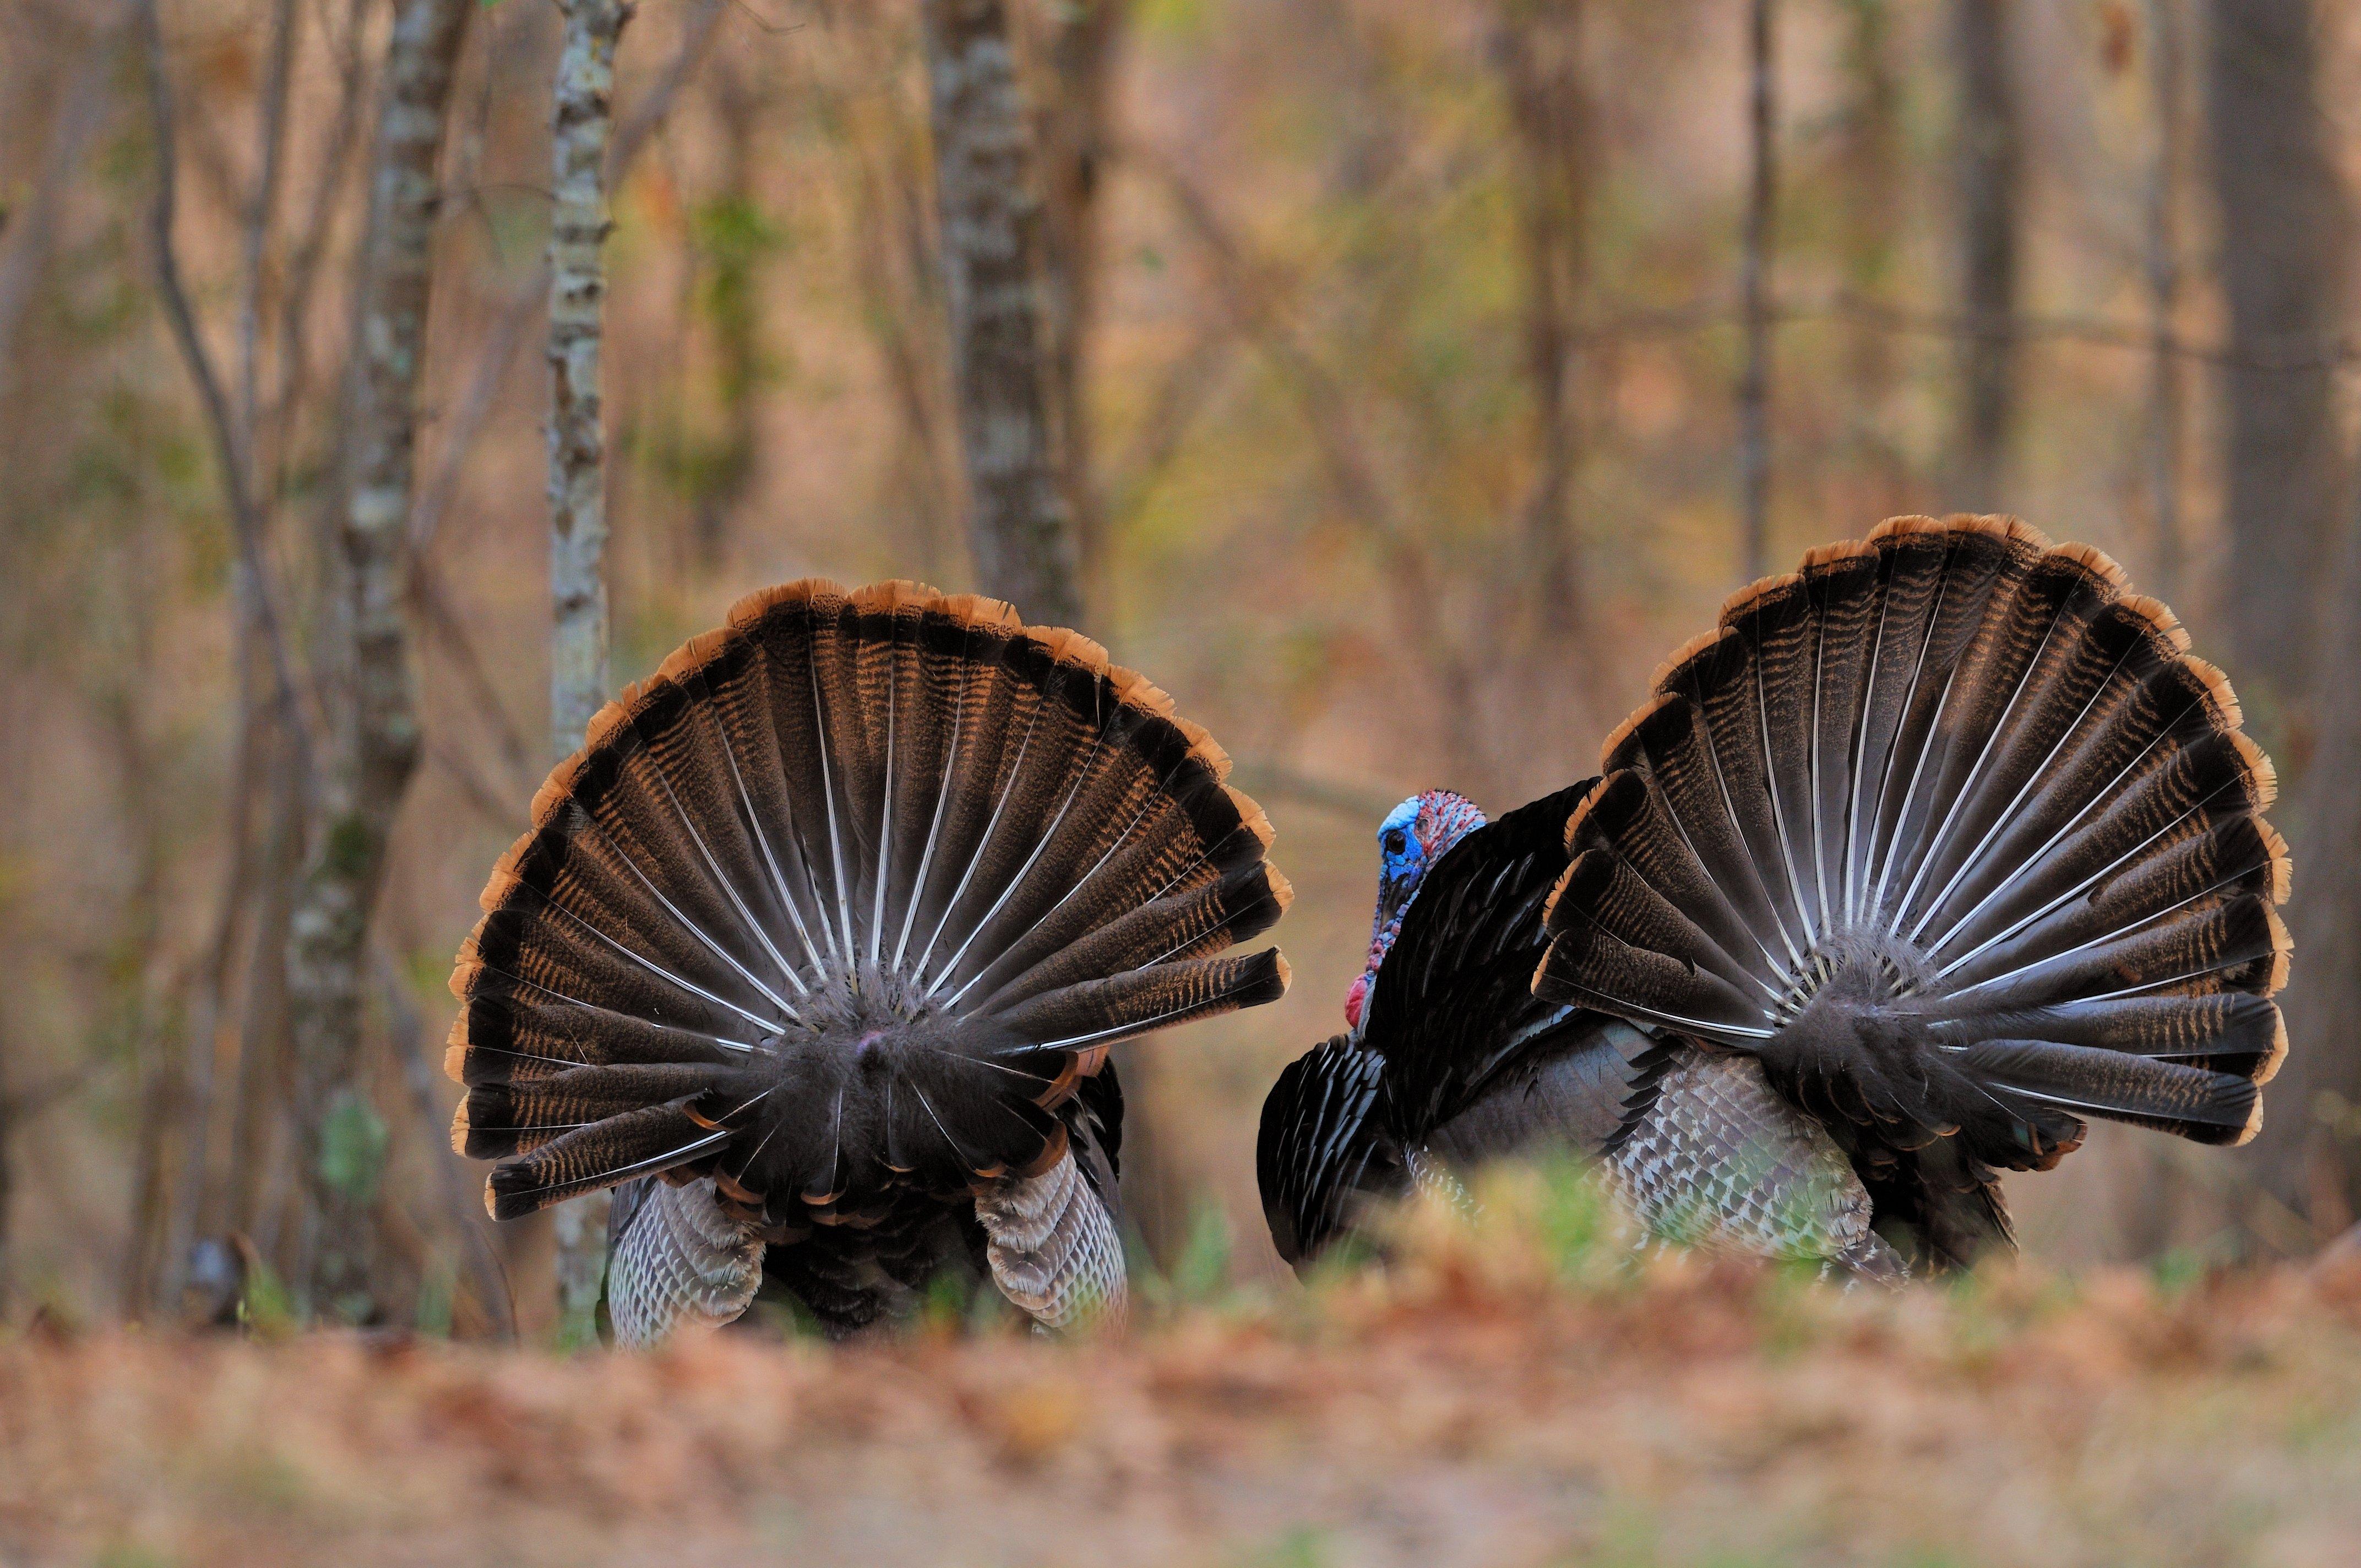 Turkey Hunting in Pennsylvania. Image by Tes Randle Jolly